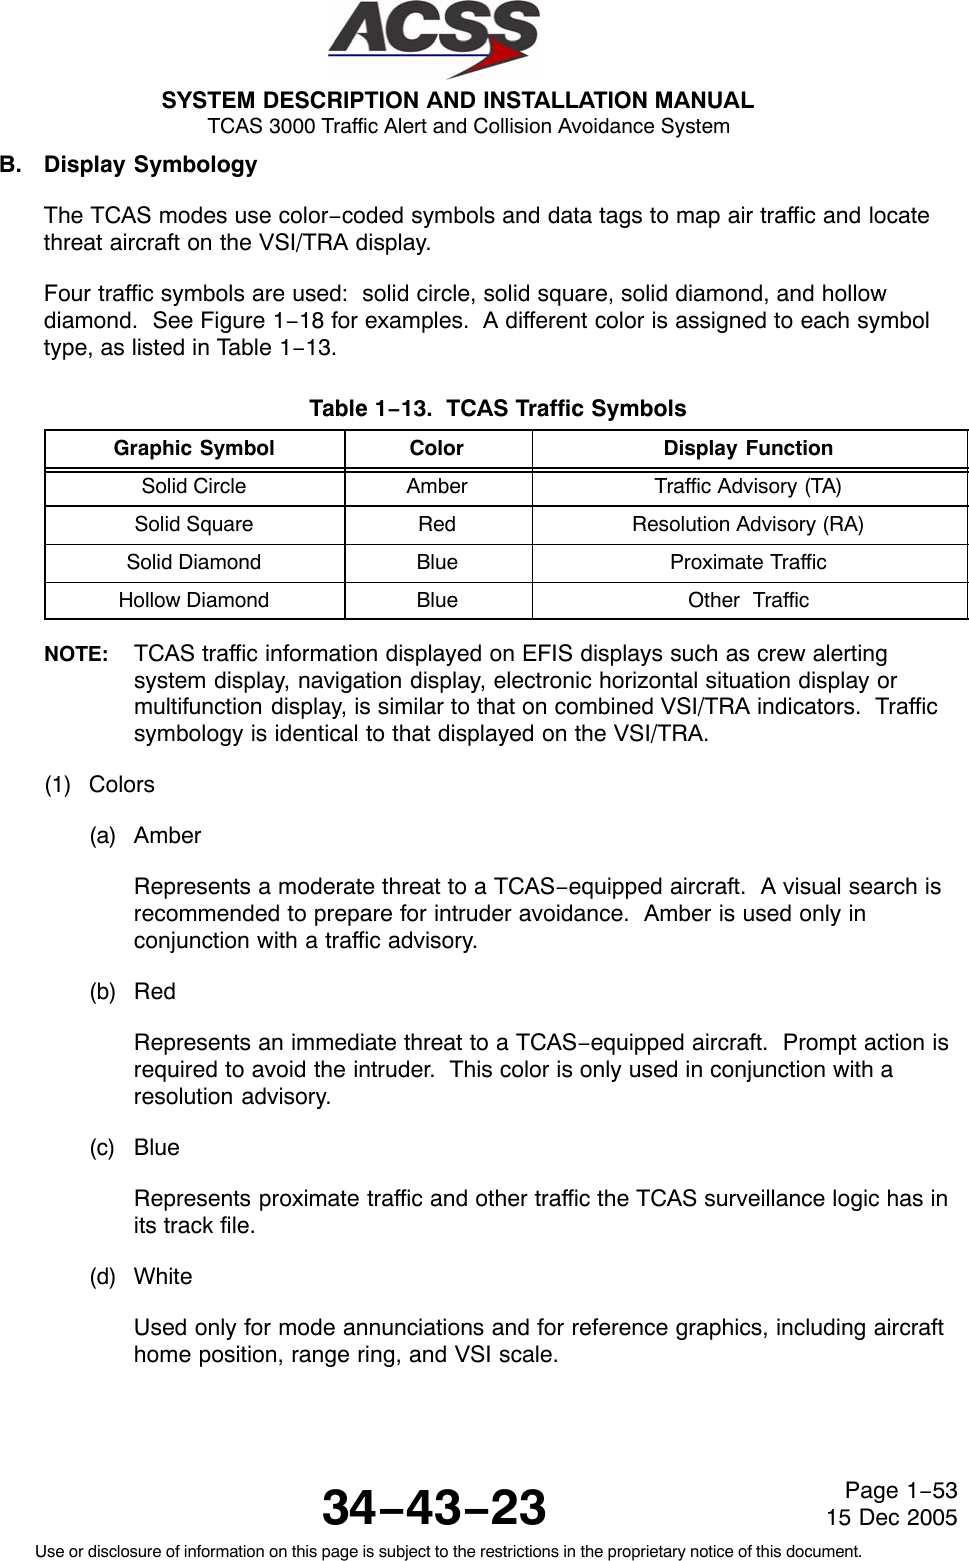 SYSTEM DESCRIPTION AND INSTALLATION MANUAL TCAS 3000 Traffic Alert and Collision Avoidance System34−43−23Use or disclosure of information on this page is subject to the restrictions in the proprietary notice of this document.Page 1−5315 Dec 2005B. Display SymbologyThe TCAS modes use color−coded symbols and data tags to map air traffic and locatethreat aircraft on the VSI/TRA display.Four traffic symbols are used:  solid circle, solid square, solid diamond, and hollowdiamond.  See Figure 1−18 for examples.  A different color is assigned to each symboltype, as listed in Table 1−13.Table 1−13.  TCAS Traffic Symbols  Graphic Symbol Color Display FunctionSolid Circle Amber Traffic Advisory (TA)Solid Square Red Resolution Advisory (RA)Solid Diamond Blue Proximate TrafficHollow Diamond Blue Other  TrafficNOTE: TCAS traffic information displayed on EFIS displays such as crew alertingsystem display, navigation display, electronic horizontal situation display ormultifunction display, is similar to that on combined VSI/TRA indicators.  Trafficsymbology is identical to that displayed on the VSI/TRA.(1) Colors(a) AmberRepresents a moderate threat to a TCAS−equipped aircraft.  A visual search isrecommended to prepare for intruder avoidance.  Amber is used only inconjunction with a traffic advisory.(b) RedRepresents an immediate threat to a TCAS−equipped aircraft.  Prompt action isrequired to avoid the intruder.  This color is only used in conjunction with aresolution advisory.(c) BlueRepresents proximate traffic and other traffic the TCAS surveillance logic has inits track file.(d) WhiteUsed only for mode annunciations and for reference graphics, including aircrafthome position, range ring, and VSI scale.